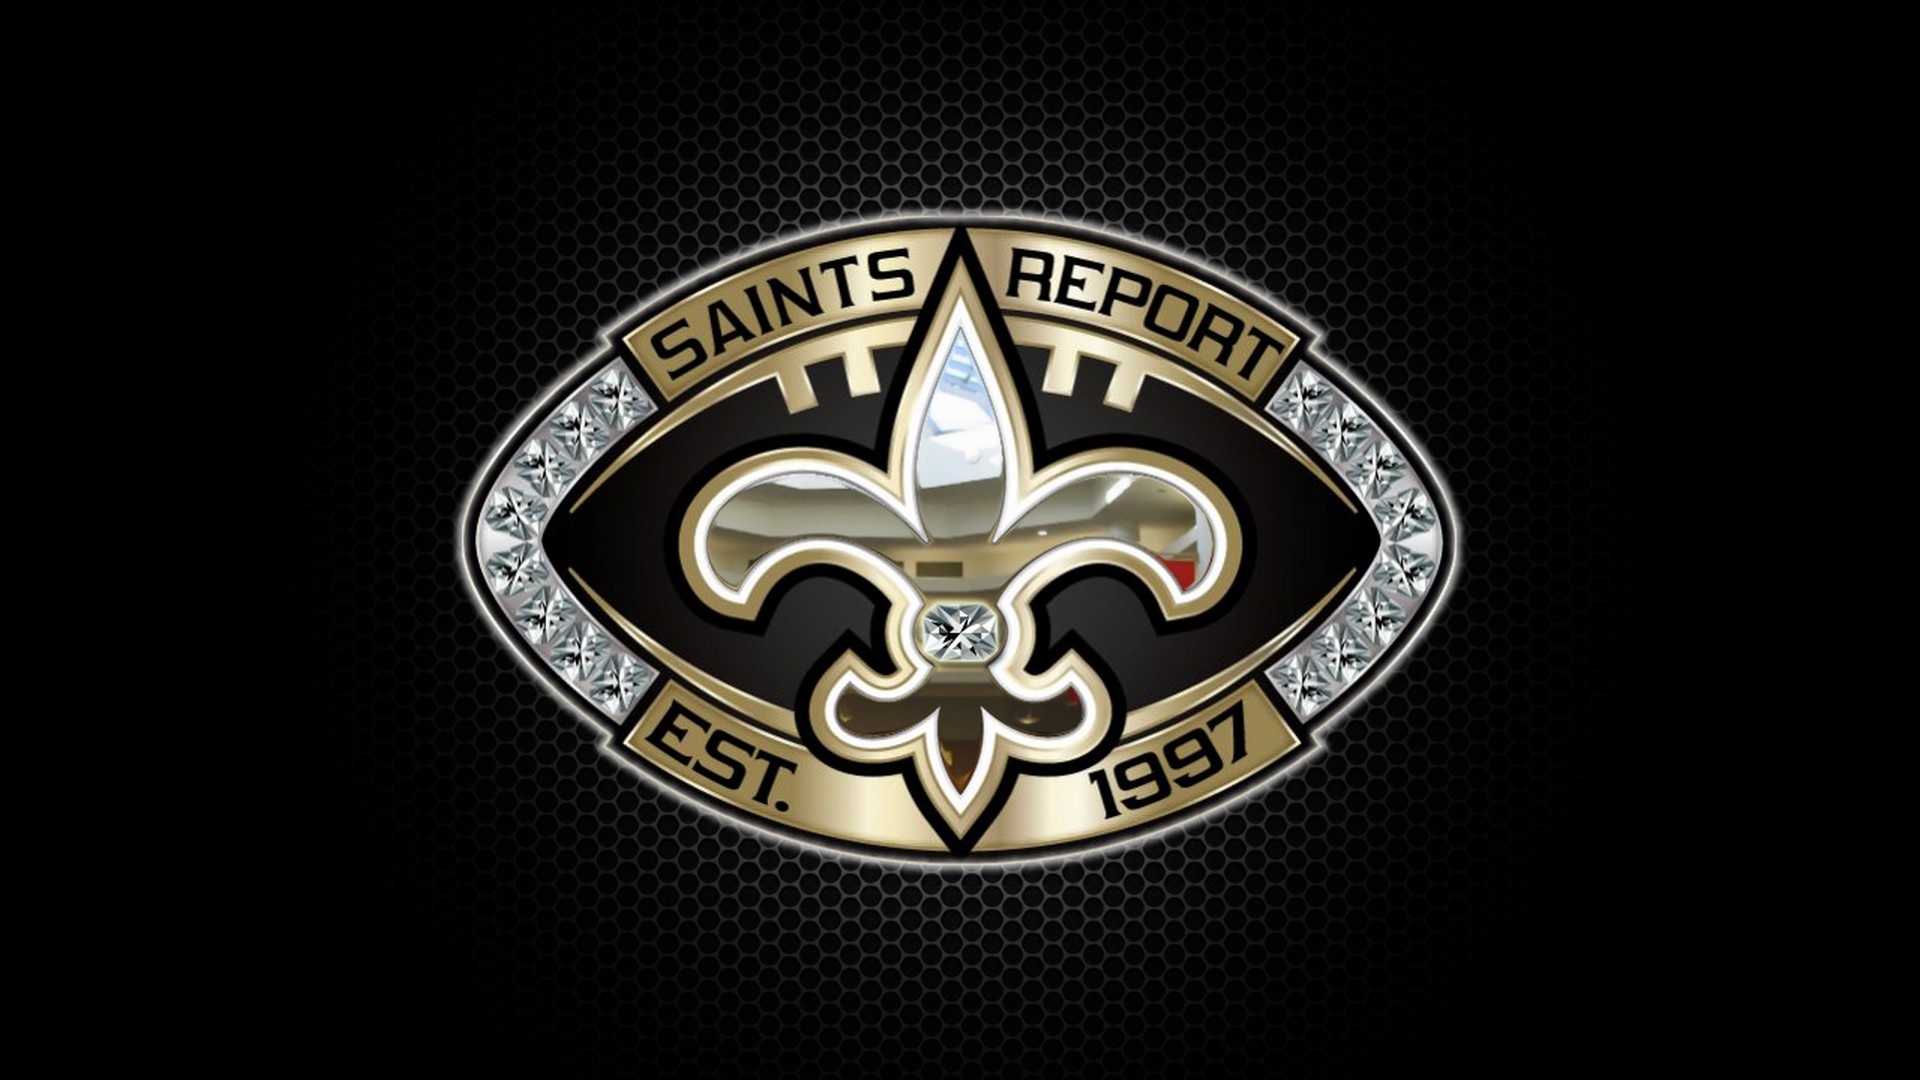 New Orleans Saints NFL Desktop Wallpapers With Resolution 1920X1080 pixel. You can make this wallpaper for your Mac or Windows Desktop Background, iPhone, Android or Tablet and another Smartphone device for free